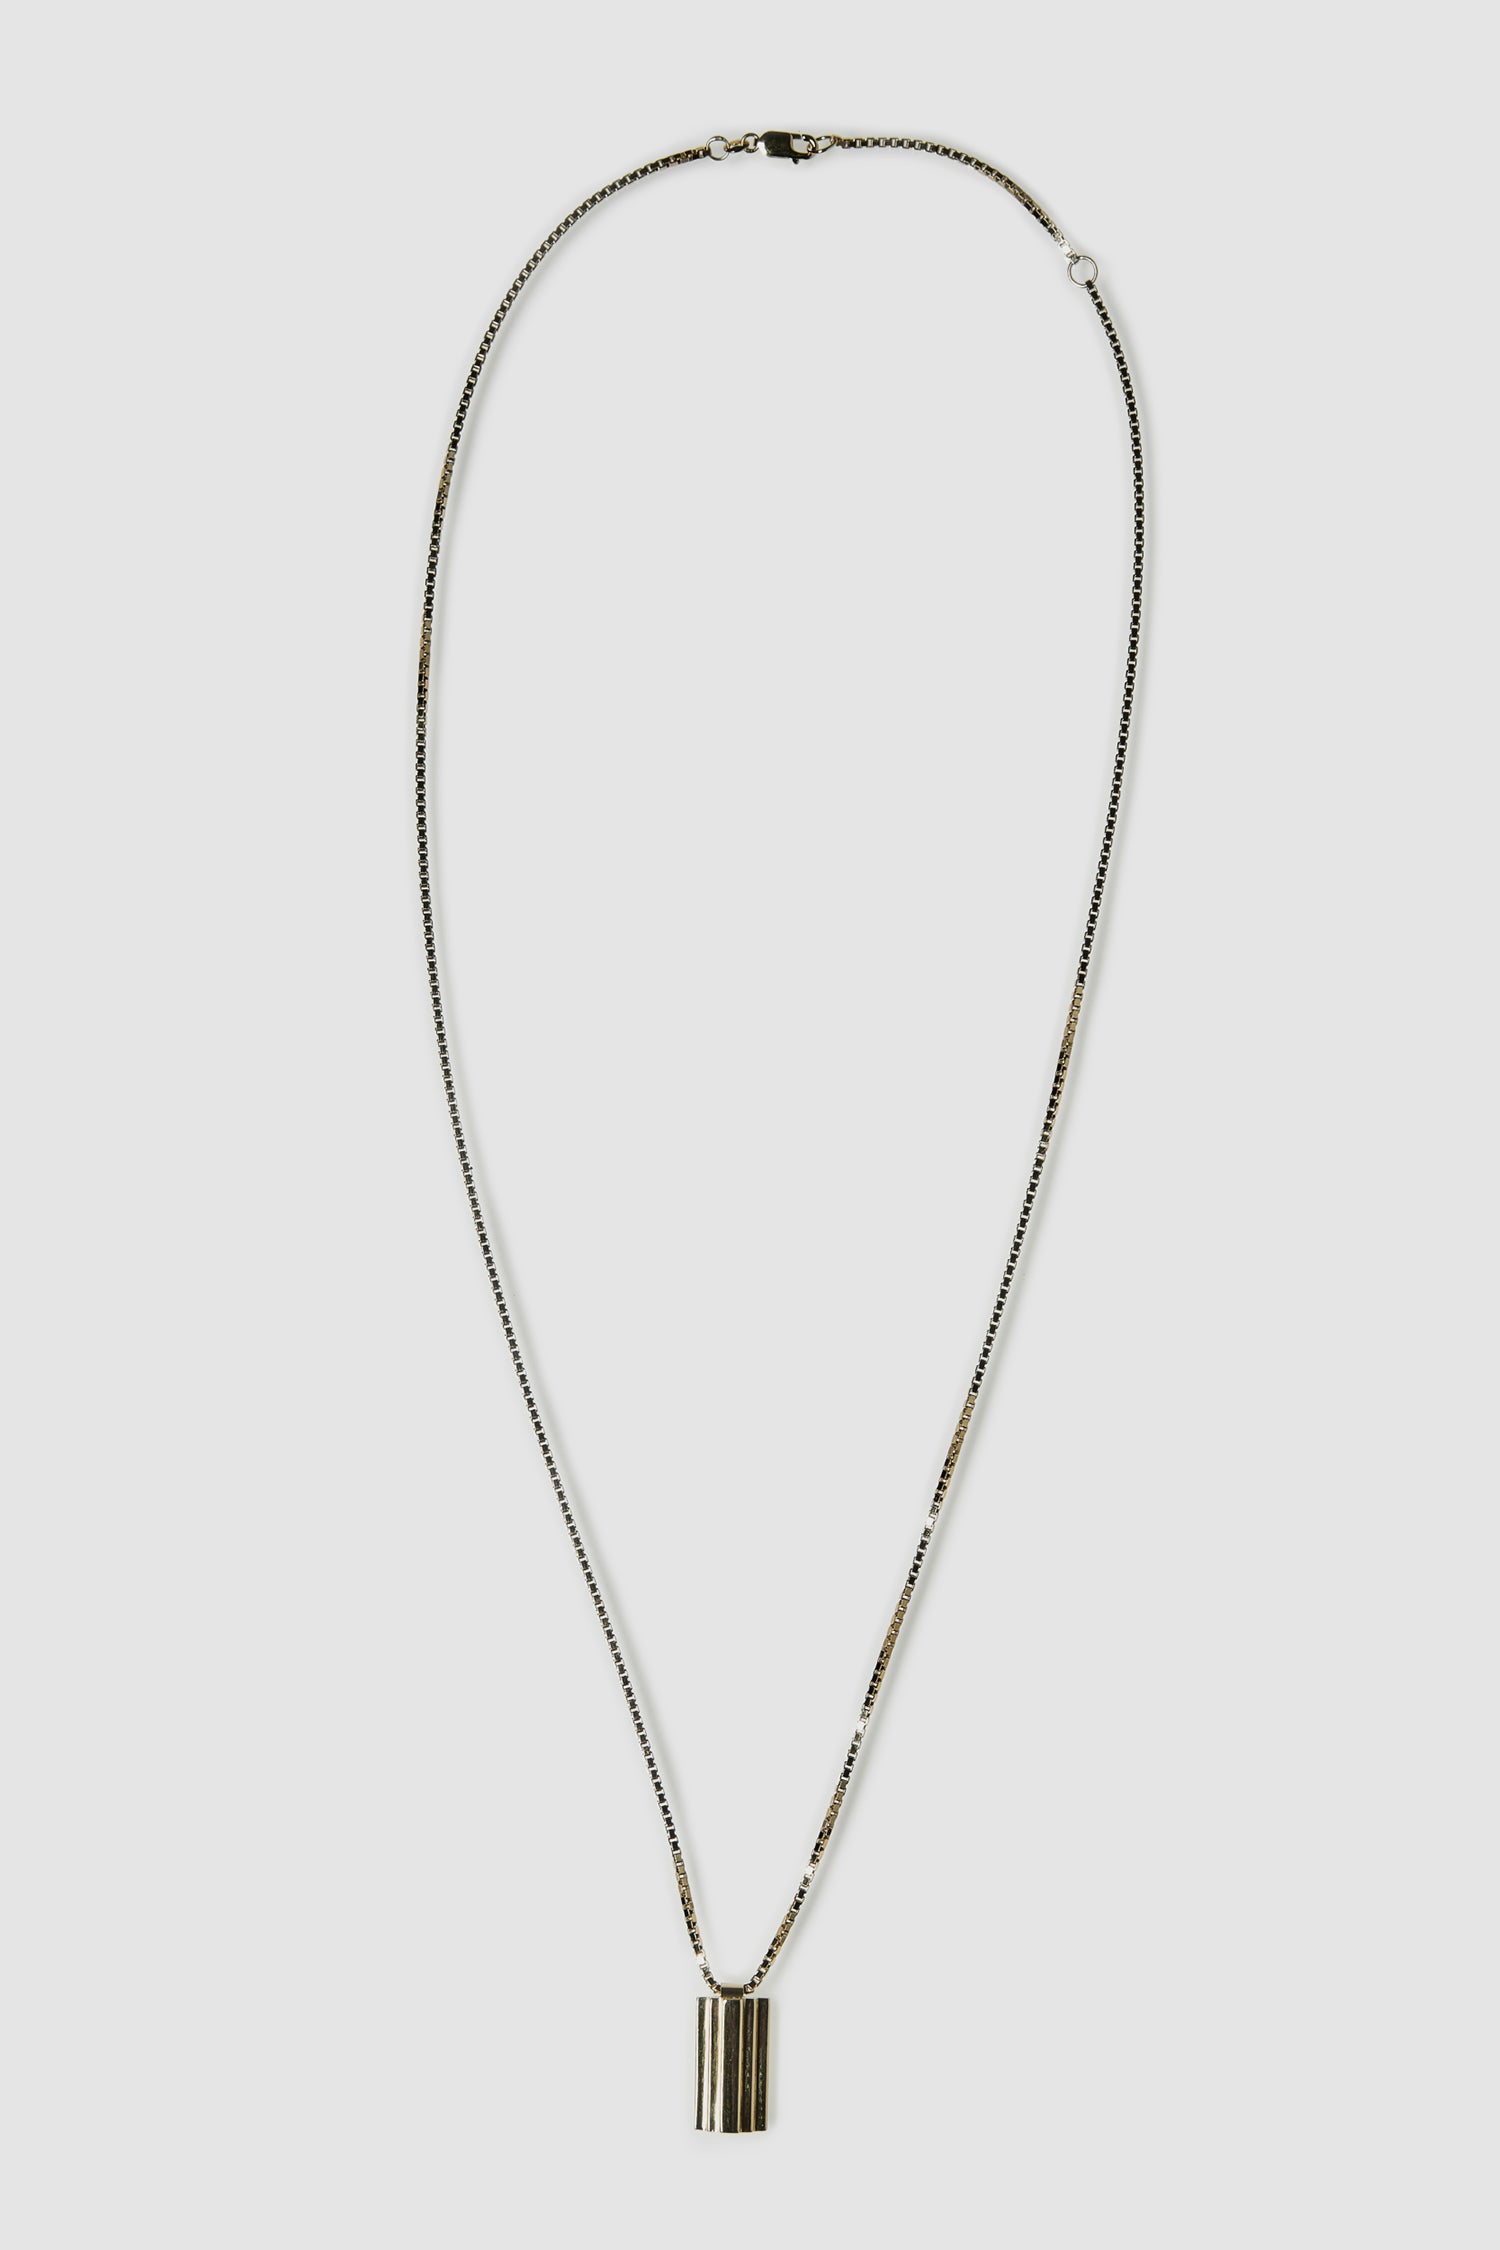 Corbusier Chain - Gold Plated